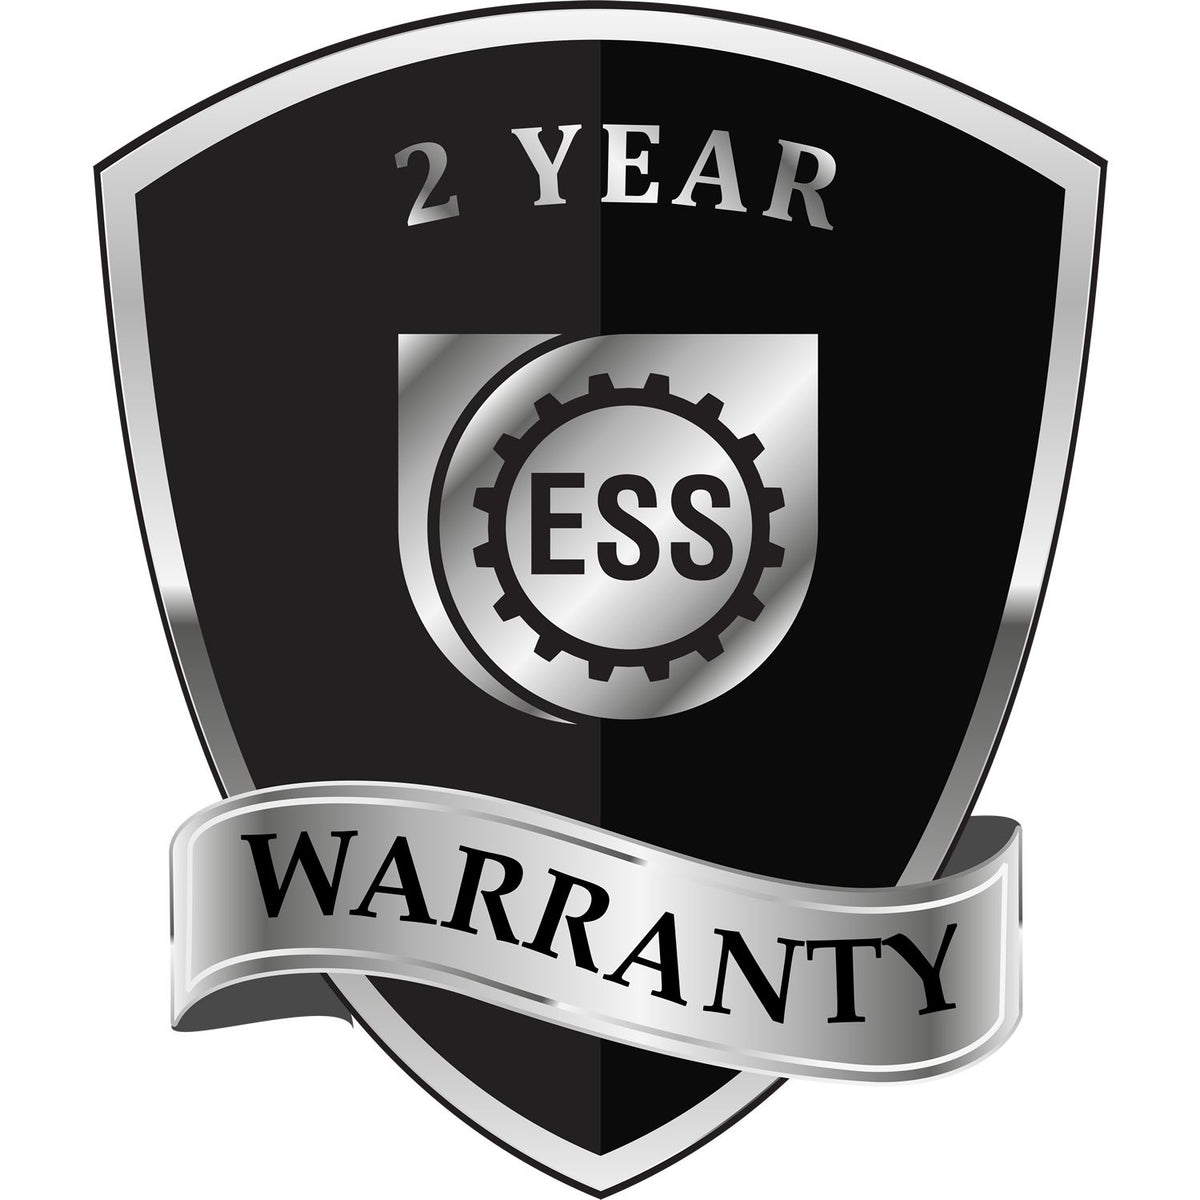 A black and silver badge or emblem showing warranty information for the Gift Wyoming Architect Seal